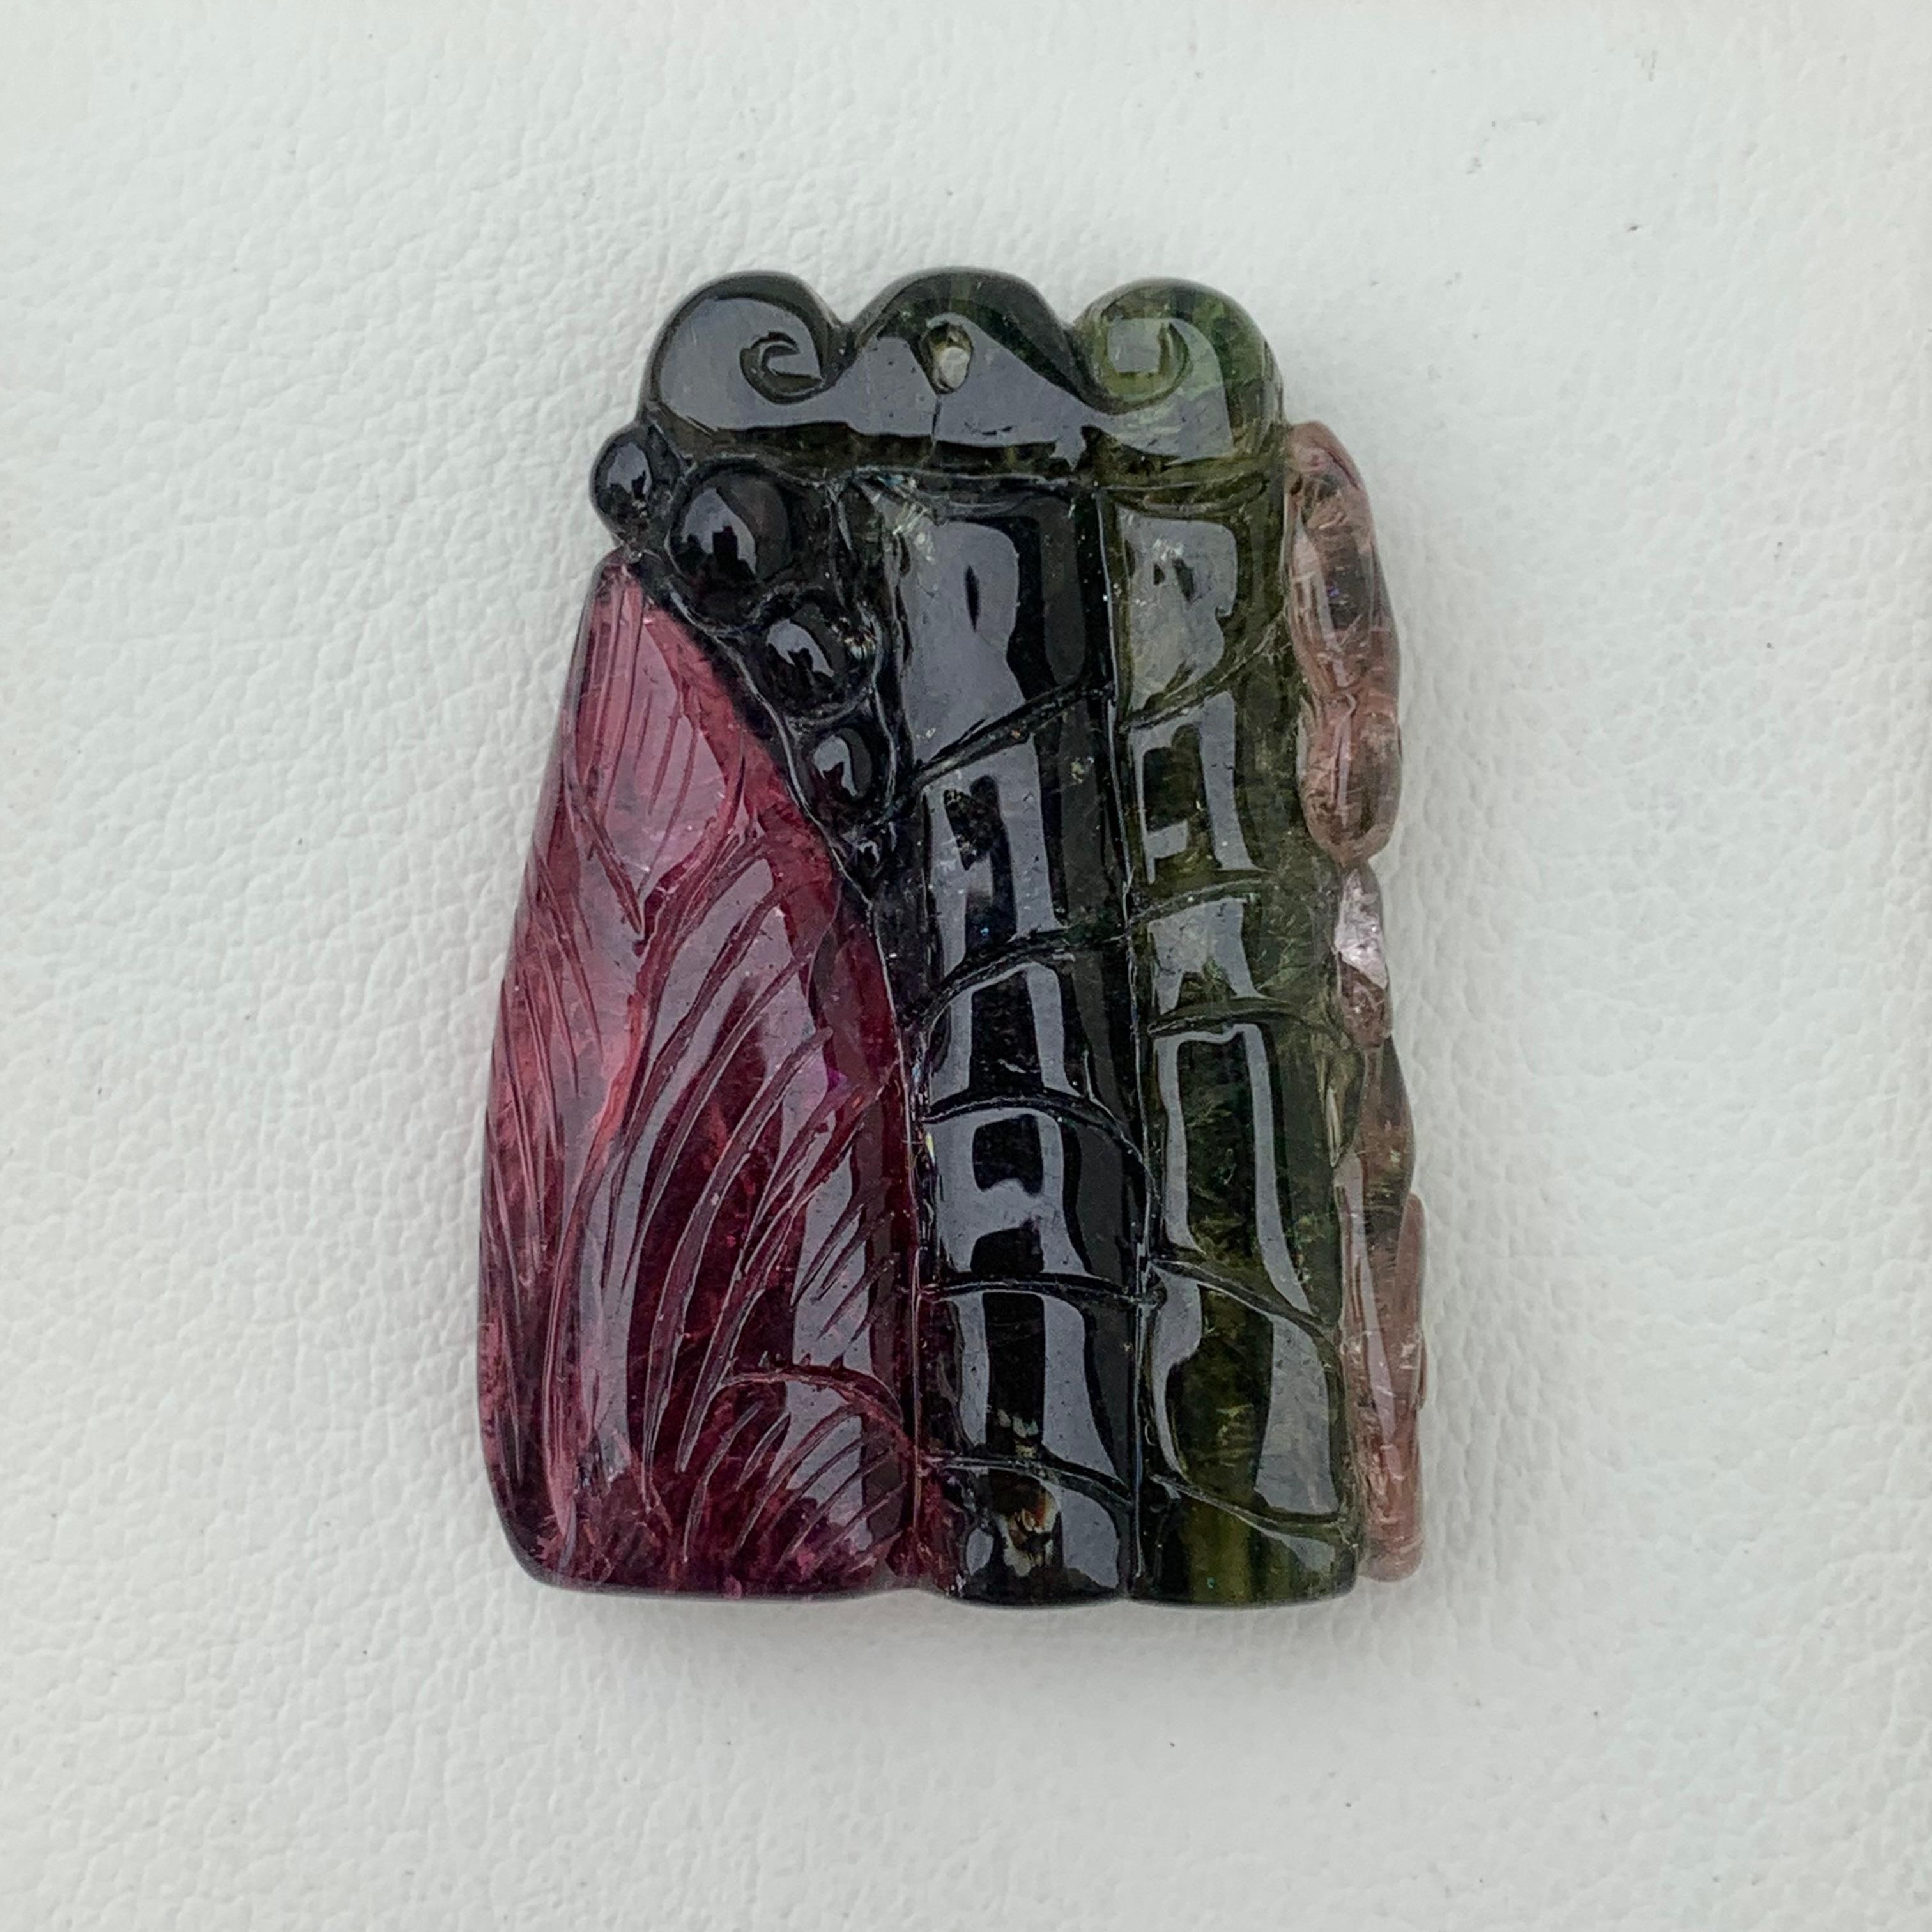 Malagasy 67.05 Carat Gorgeous Tri Color Tourmaline Drilled Carving from Africa For Sale